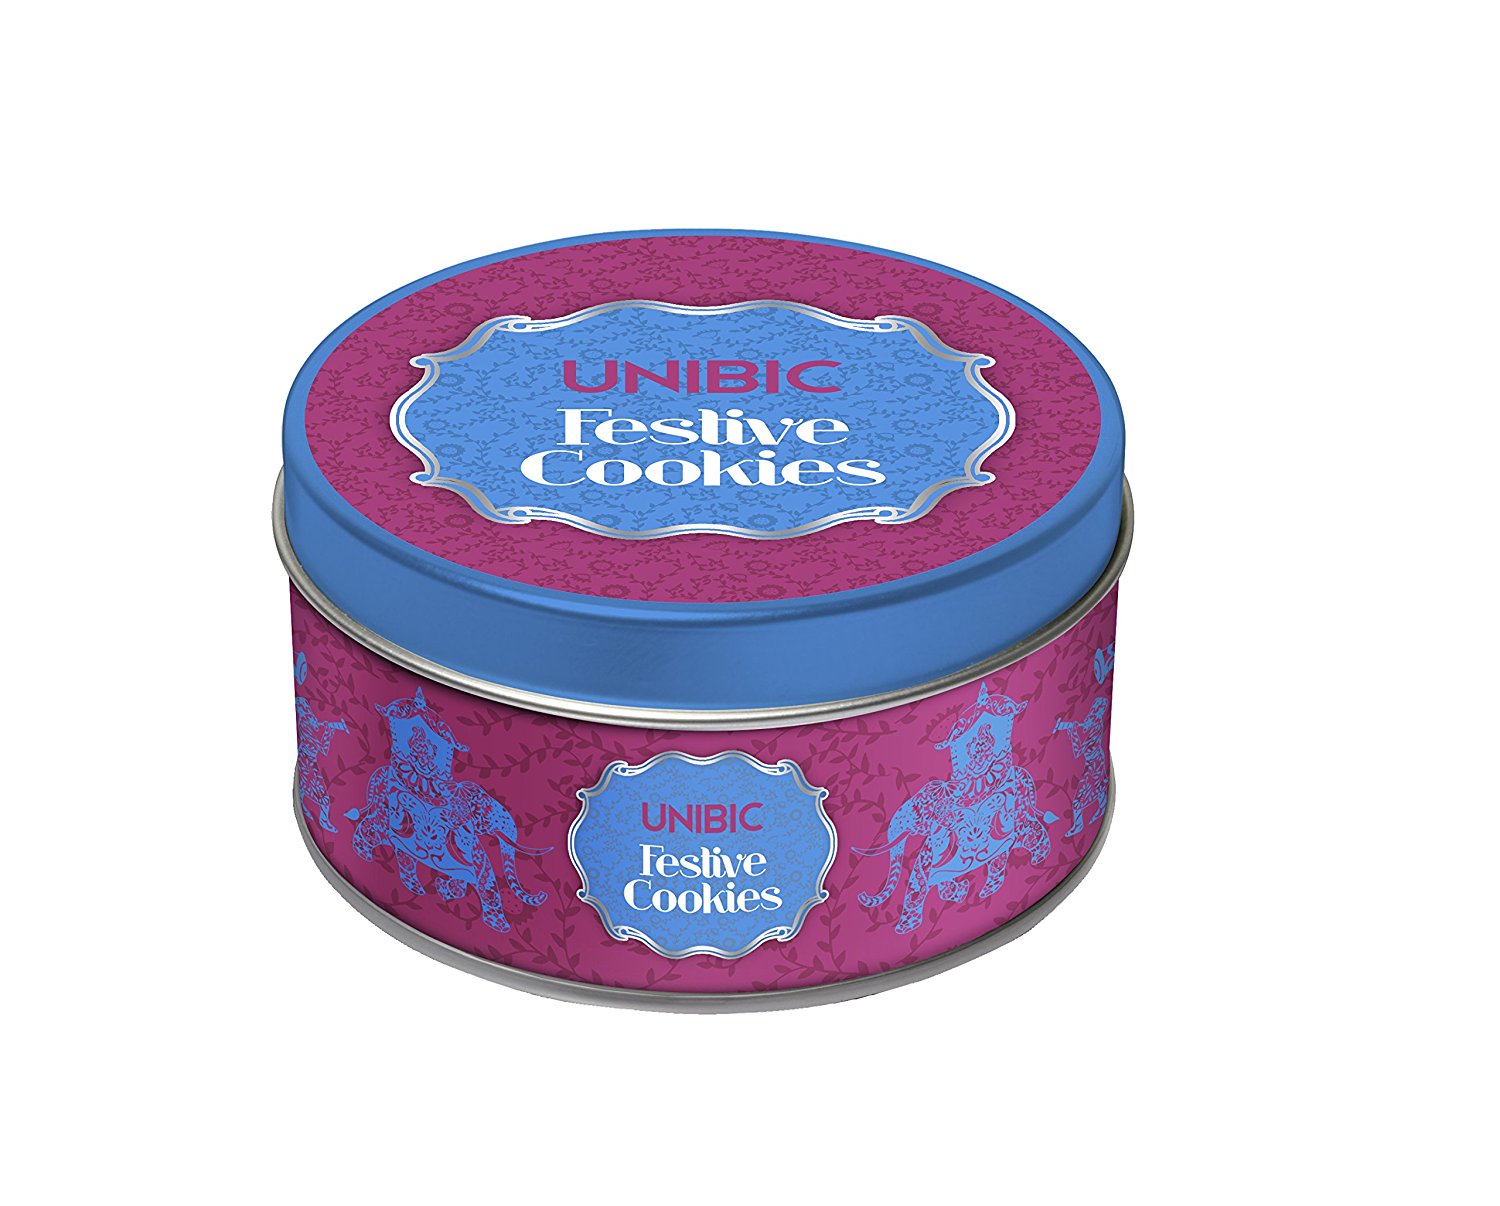 Amazon: Buy Unibic Festive Cookies Tin 150g at Rs 99 only